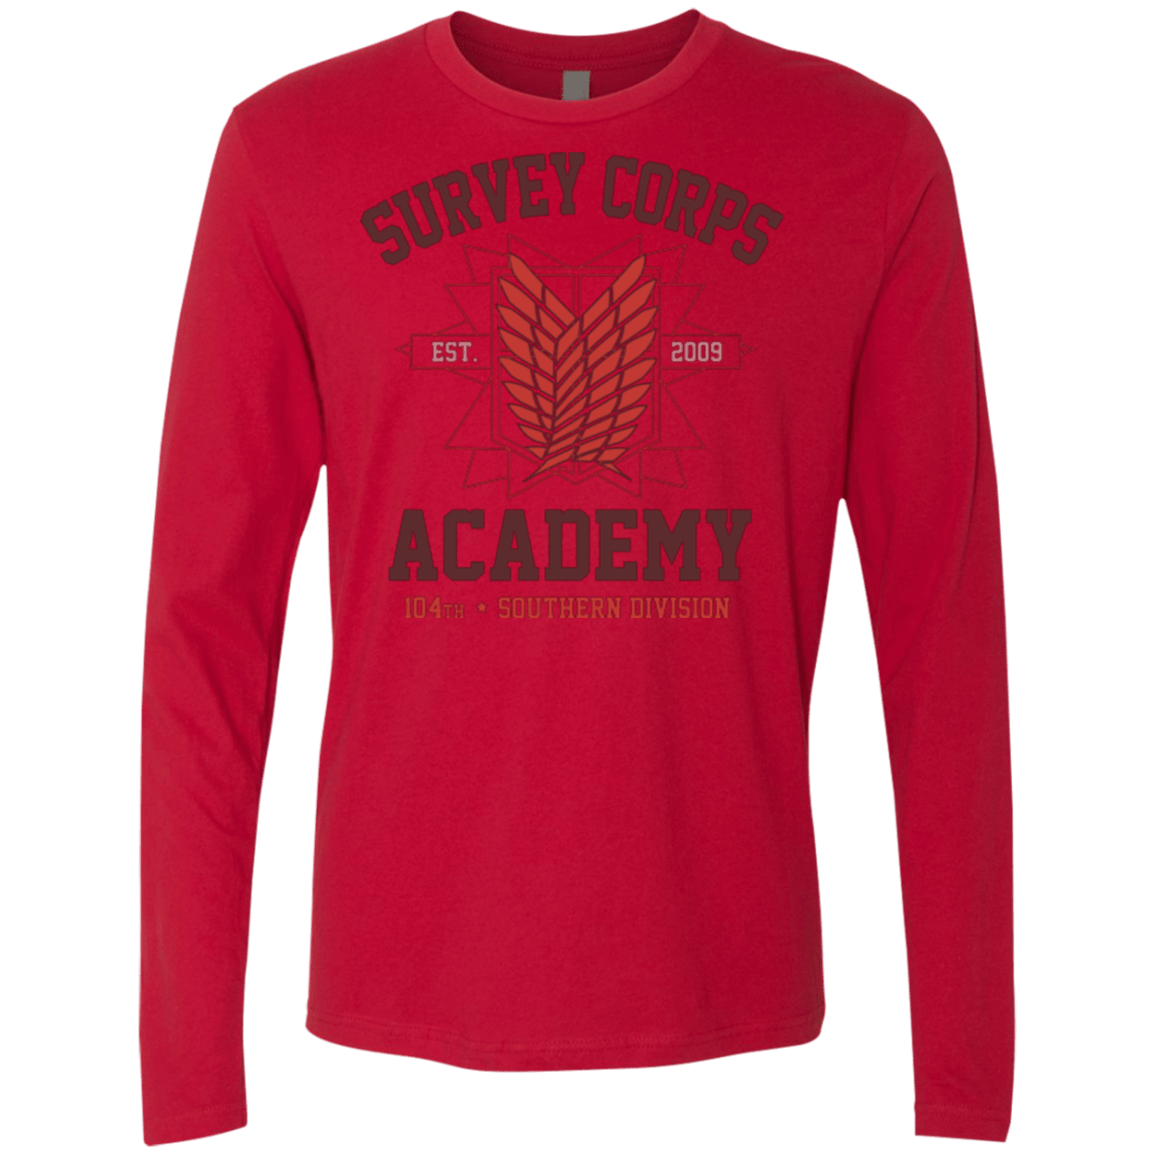 T-Shirts Red / Small Survey Corps Academy Men's Premium Long Sleeve